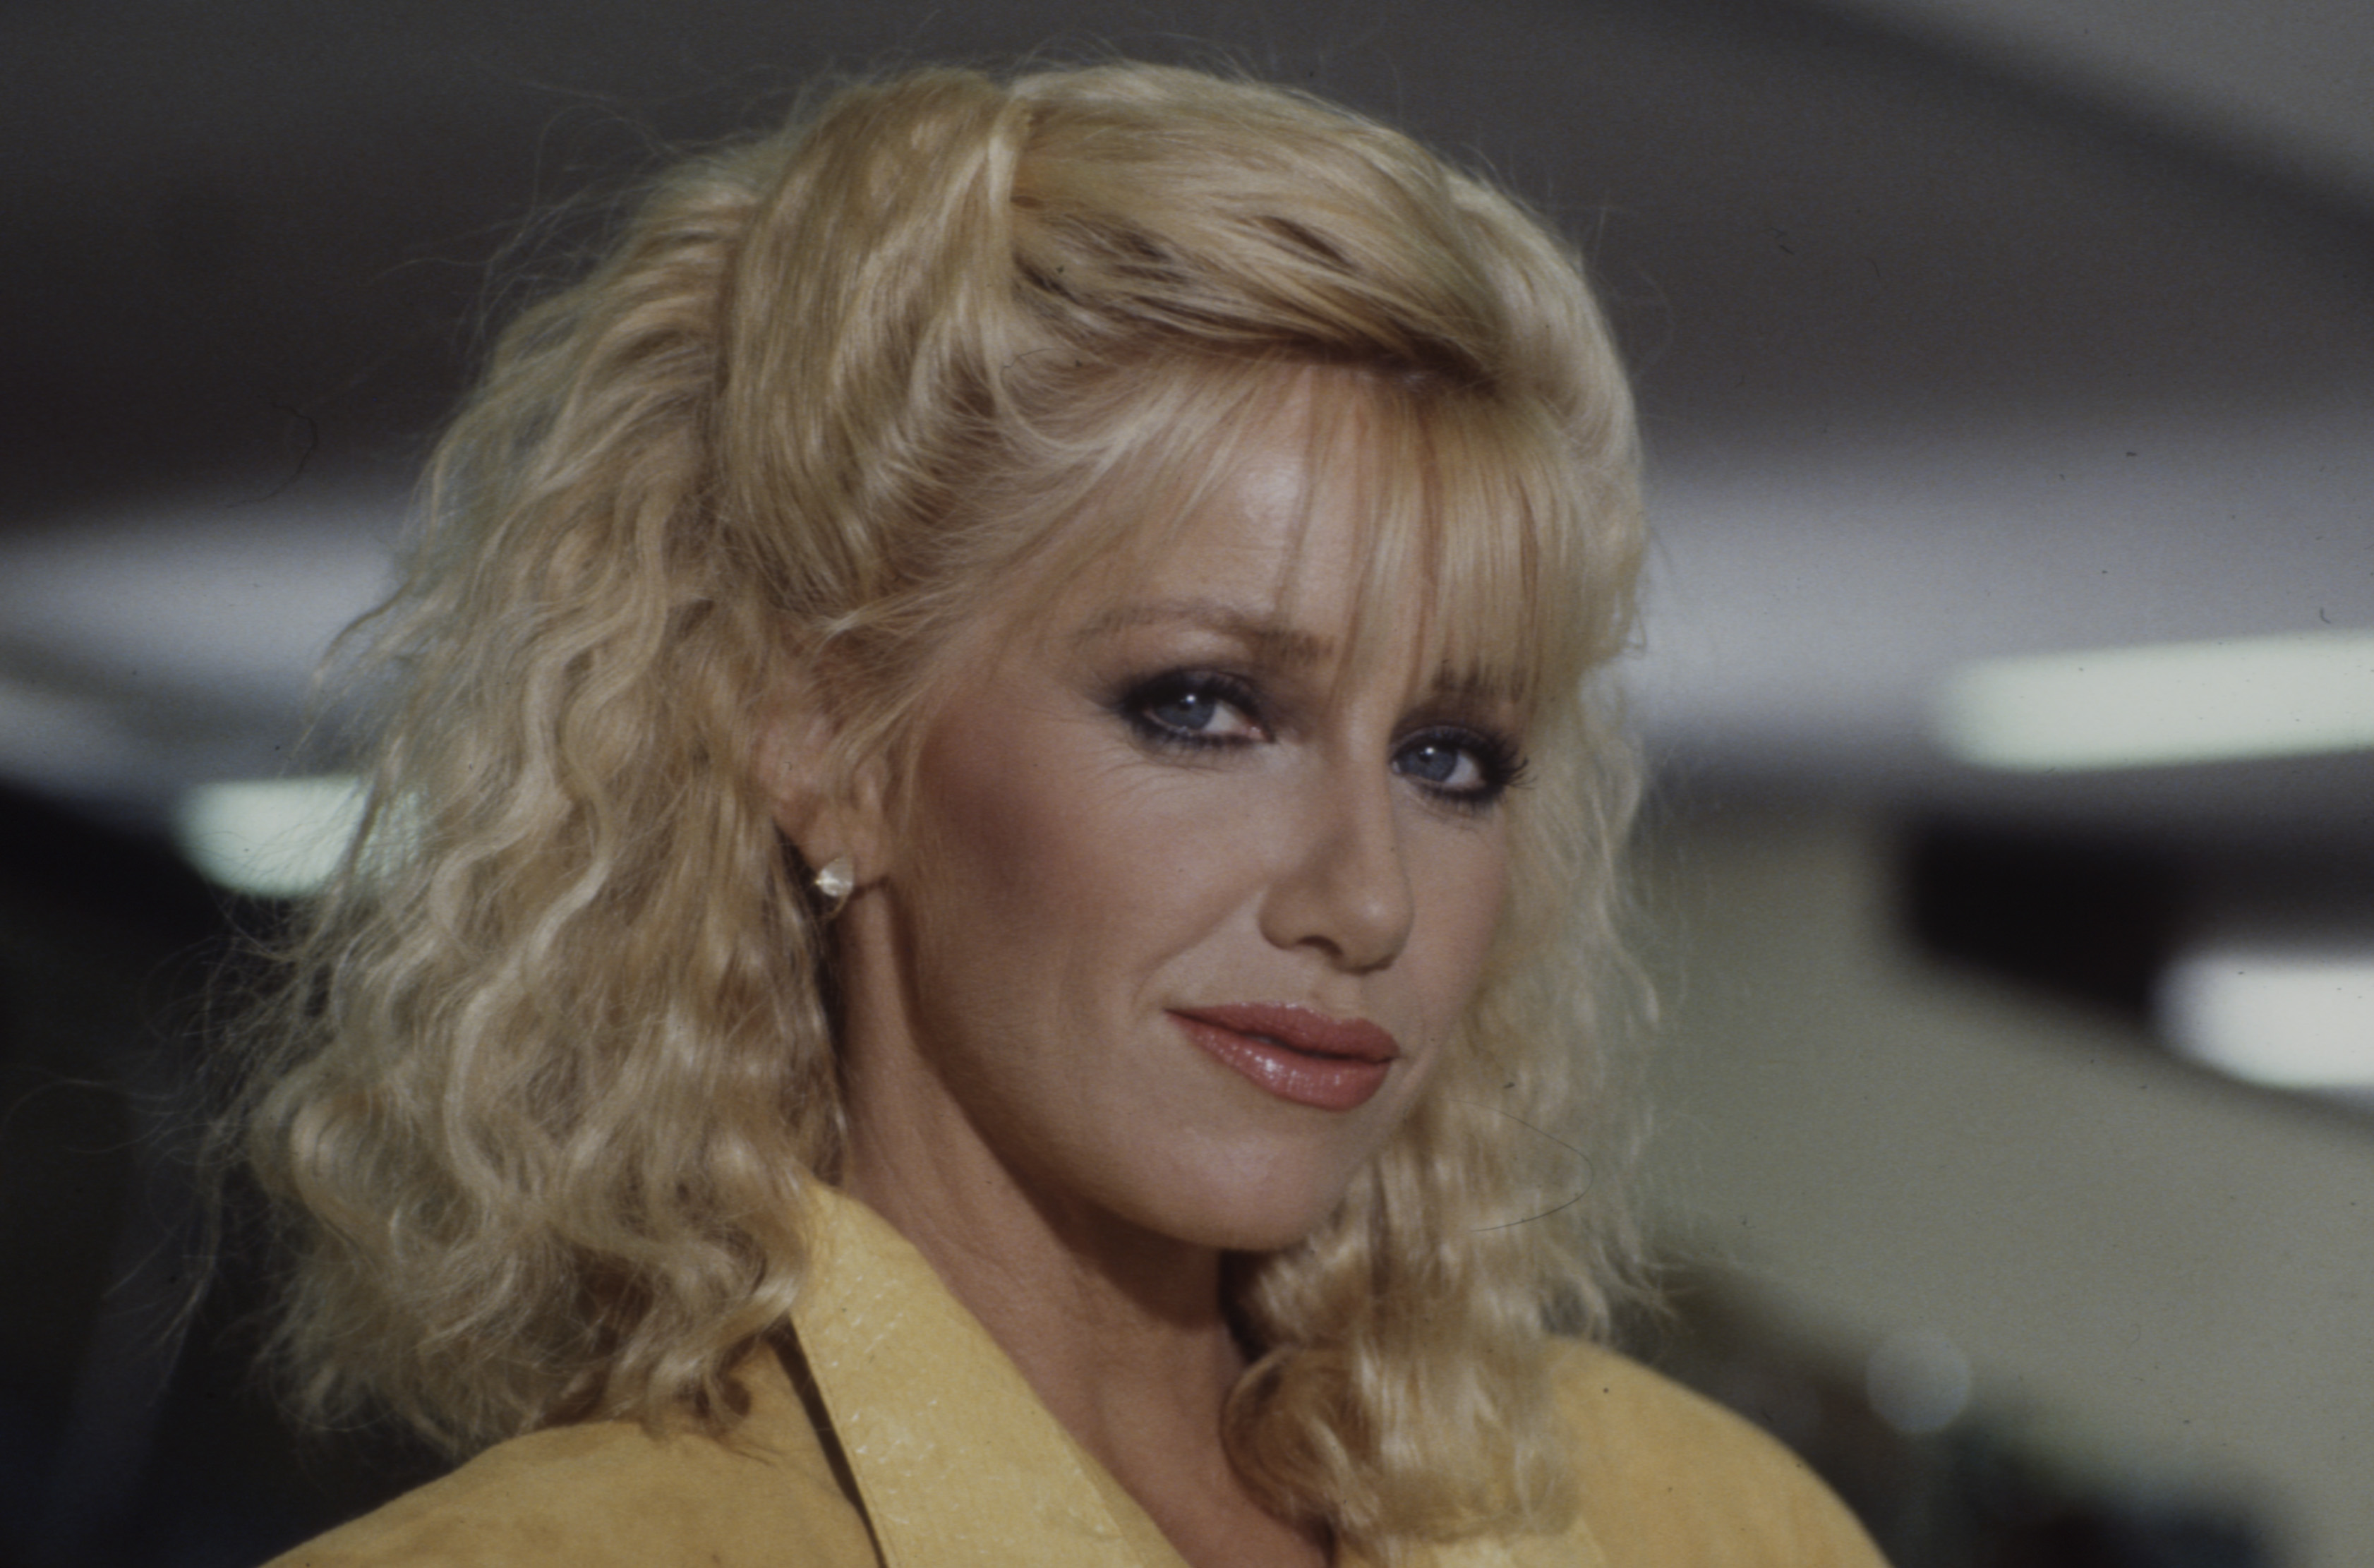 Suzanne Somers in "Hollywood Wives" in 1985 | Source: Getty Images